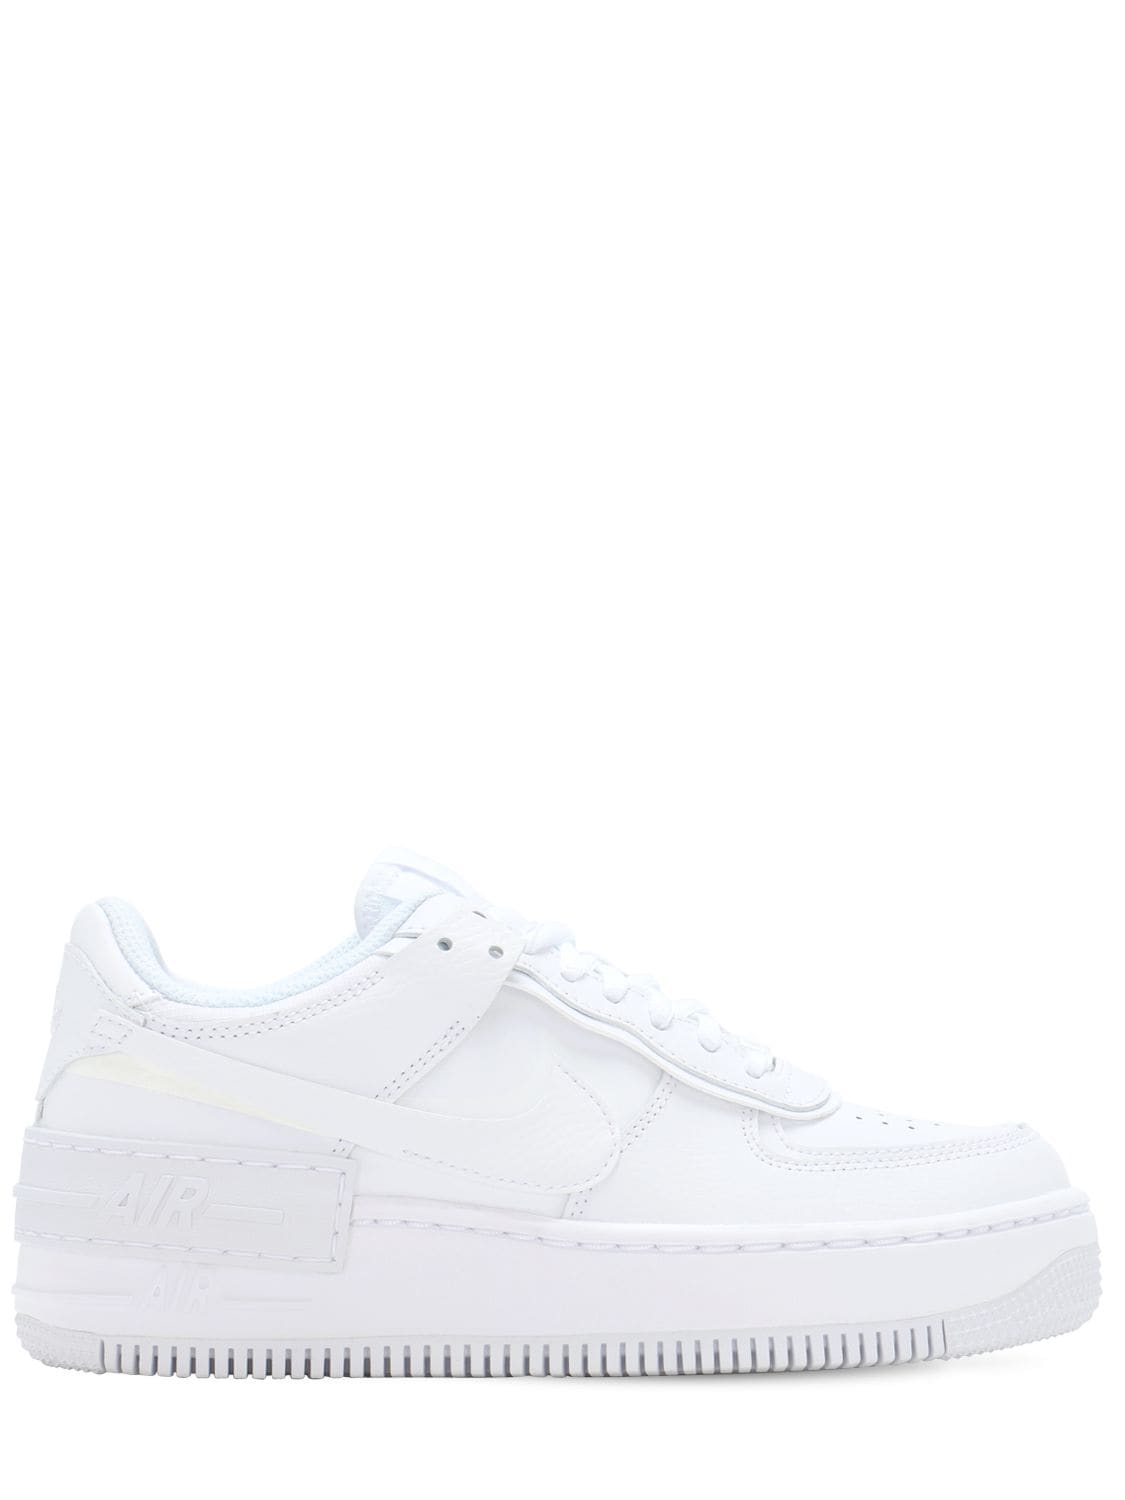 NIKE AIR FORCE 1 SHADOW trainers,72IDL1009-MTAW0